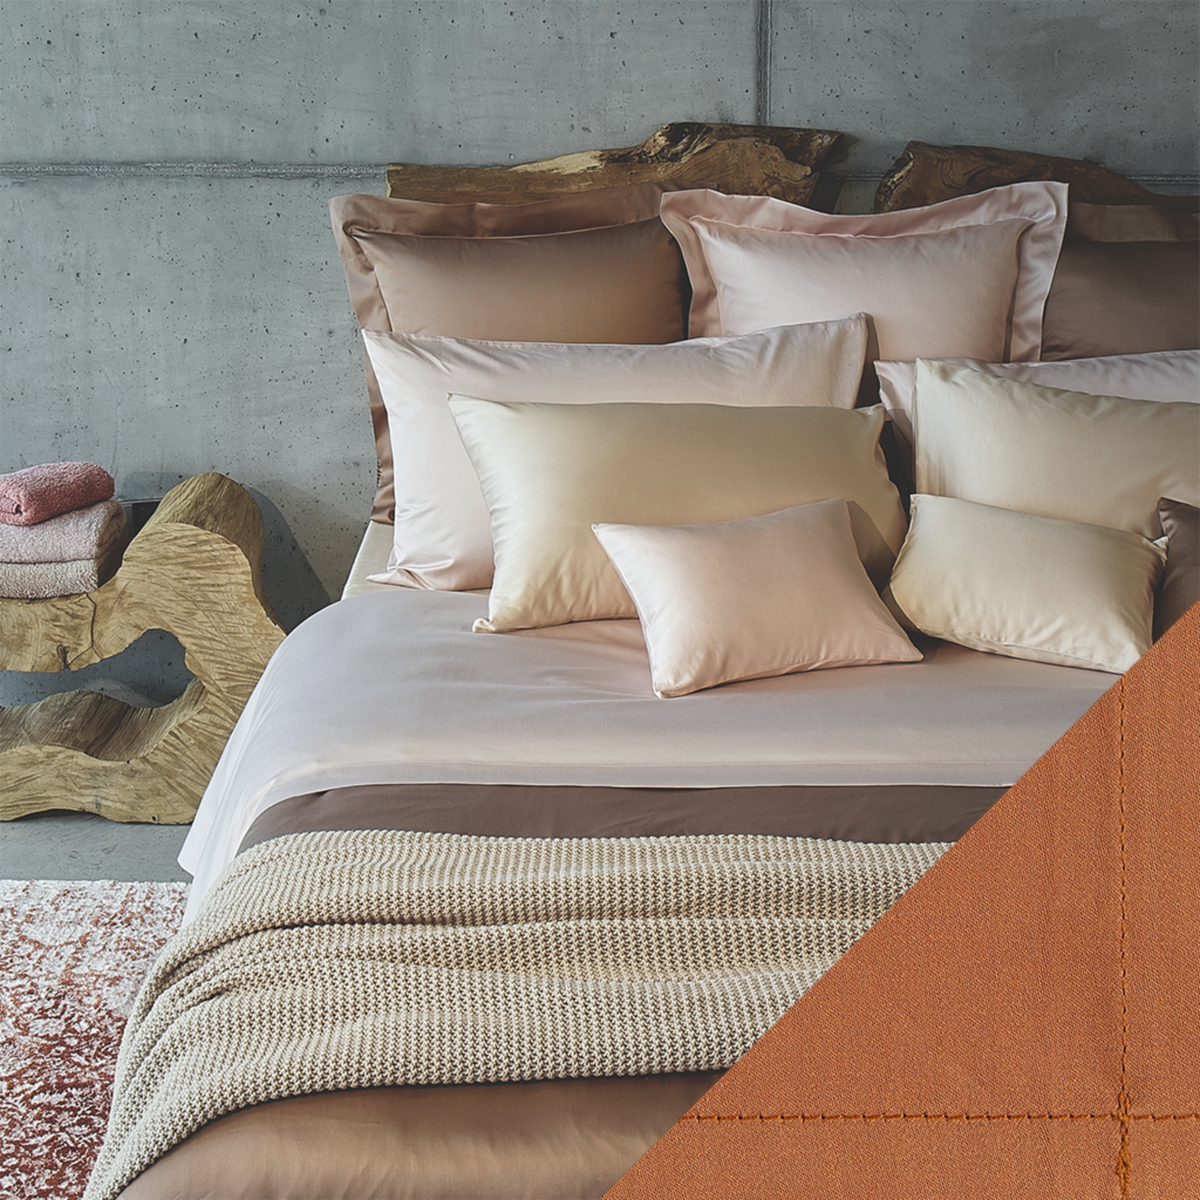 Full Bed Dressed in Celso de Lemos Secret Bedding with Caramel Colored Swatch